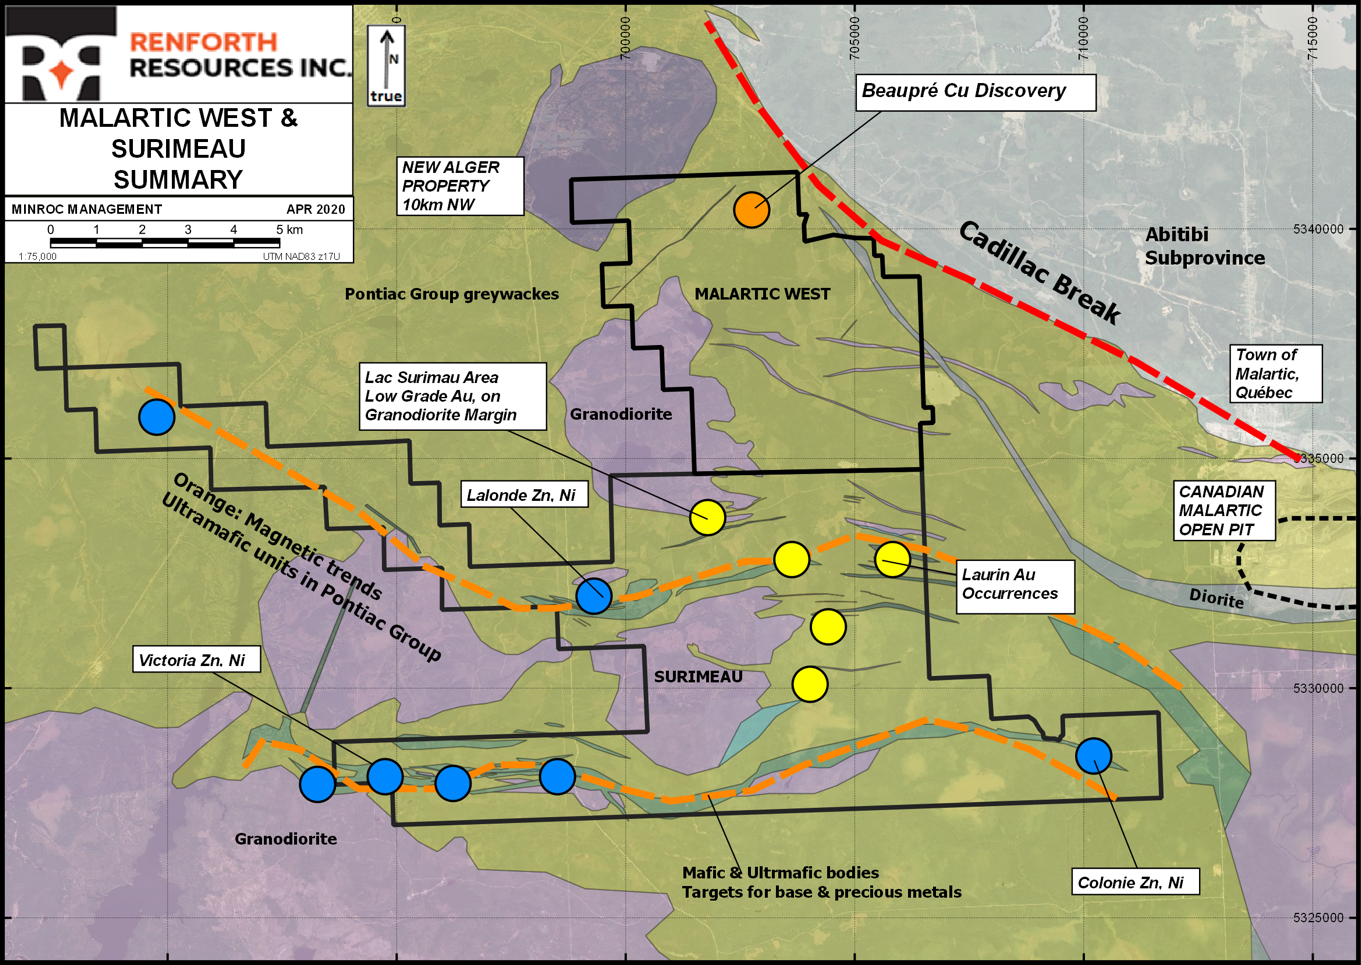 Renforth Resources Inc., Wednesday, October 21, 2020, Press release picture